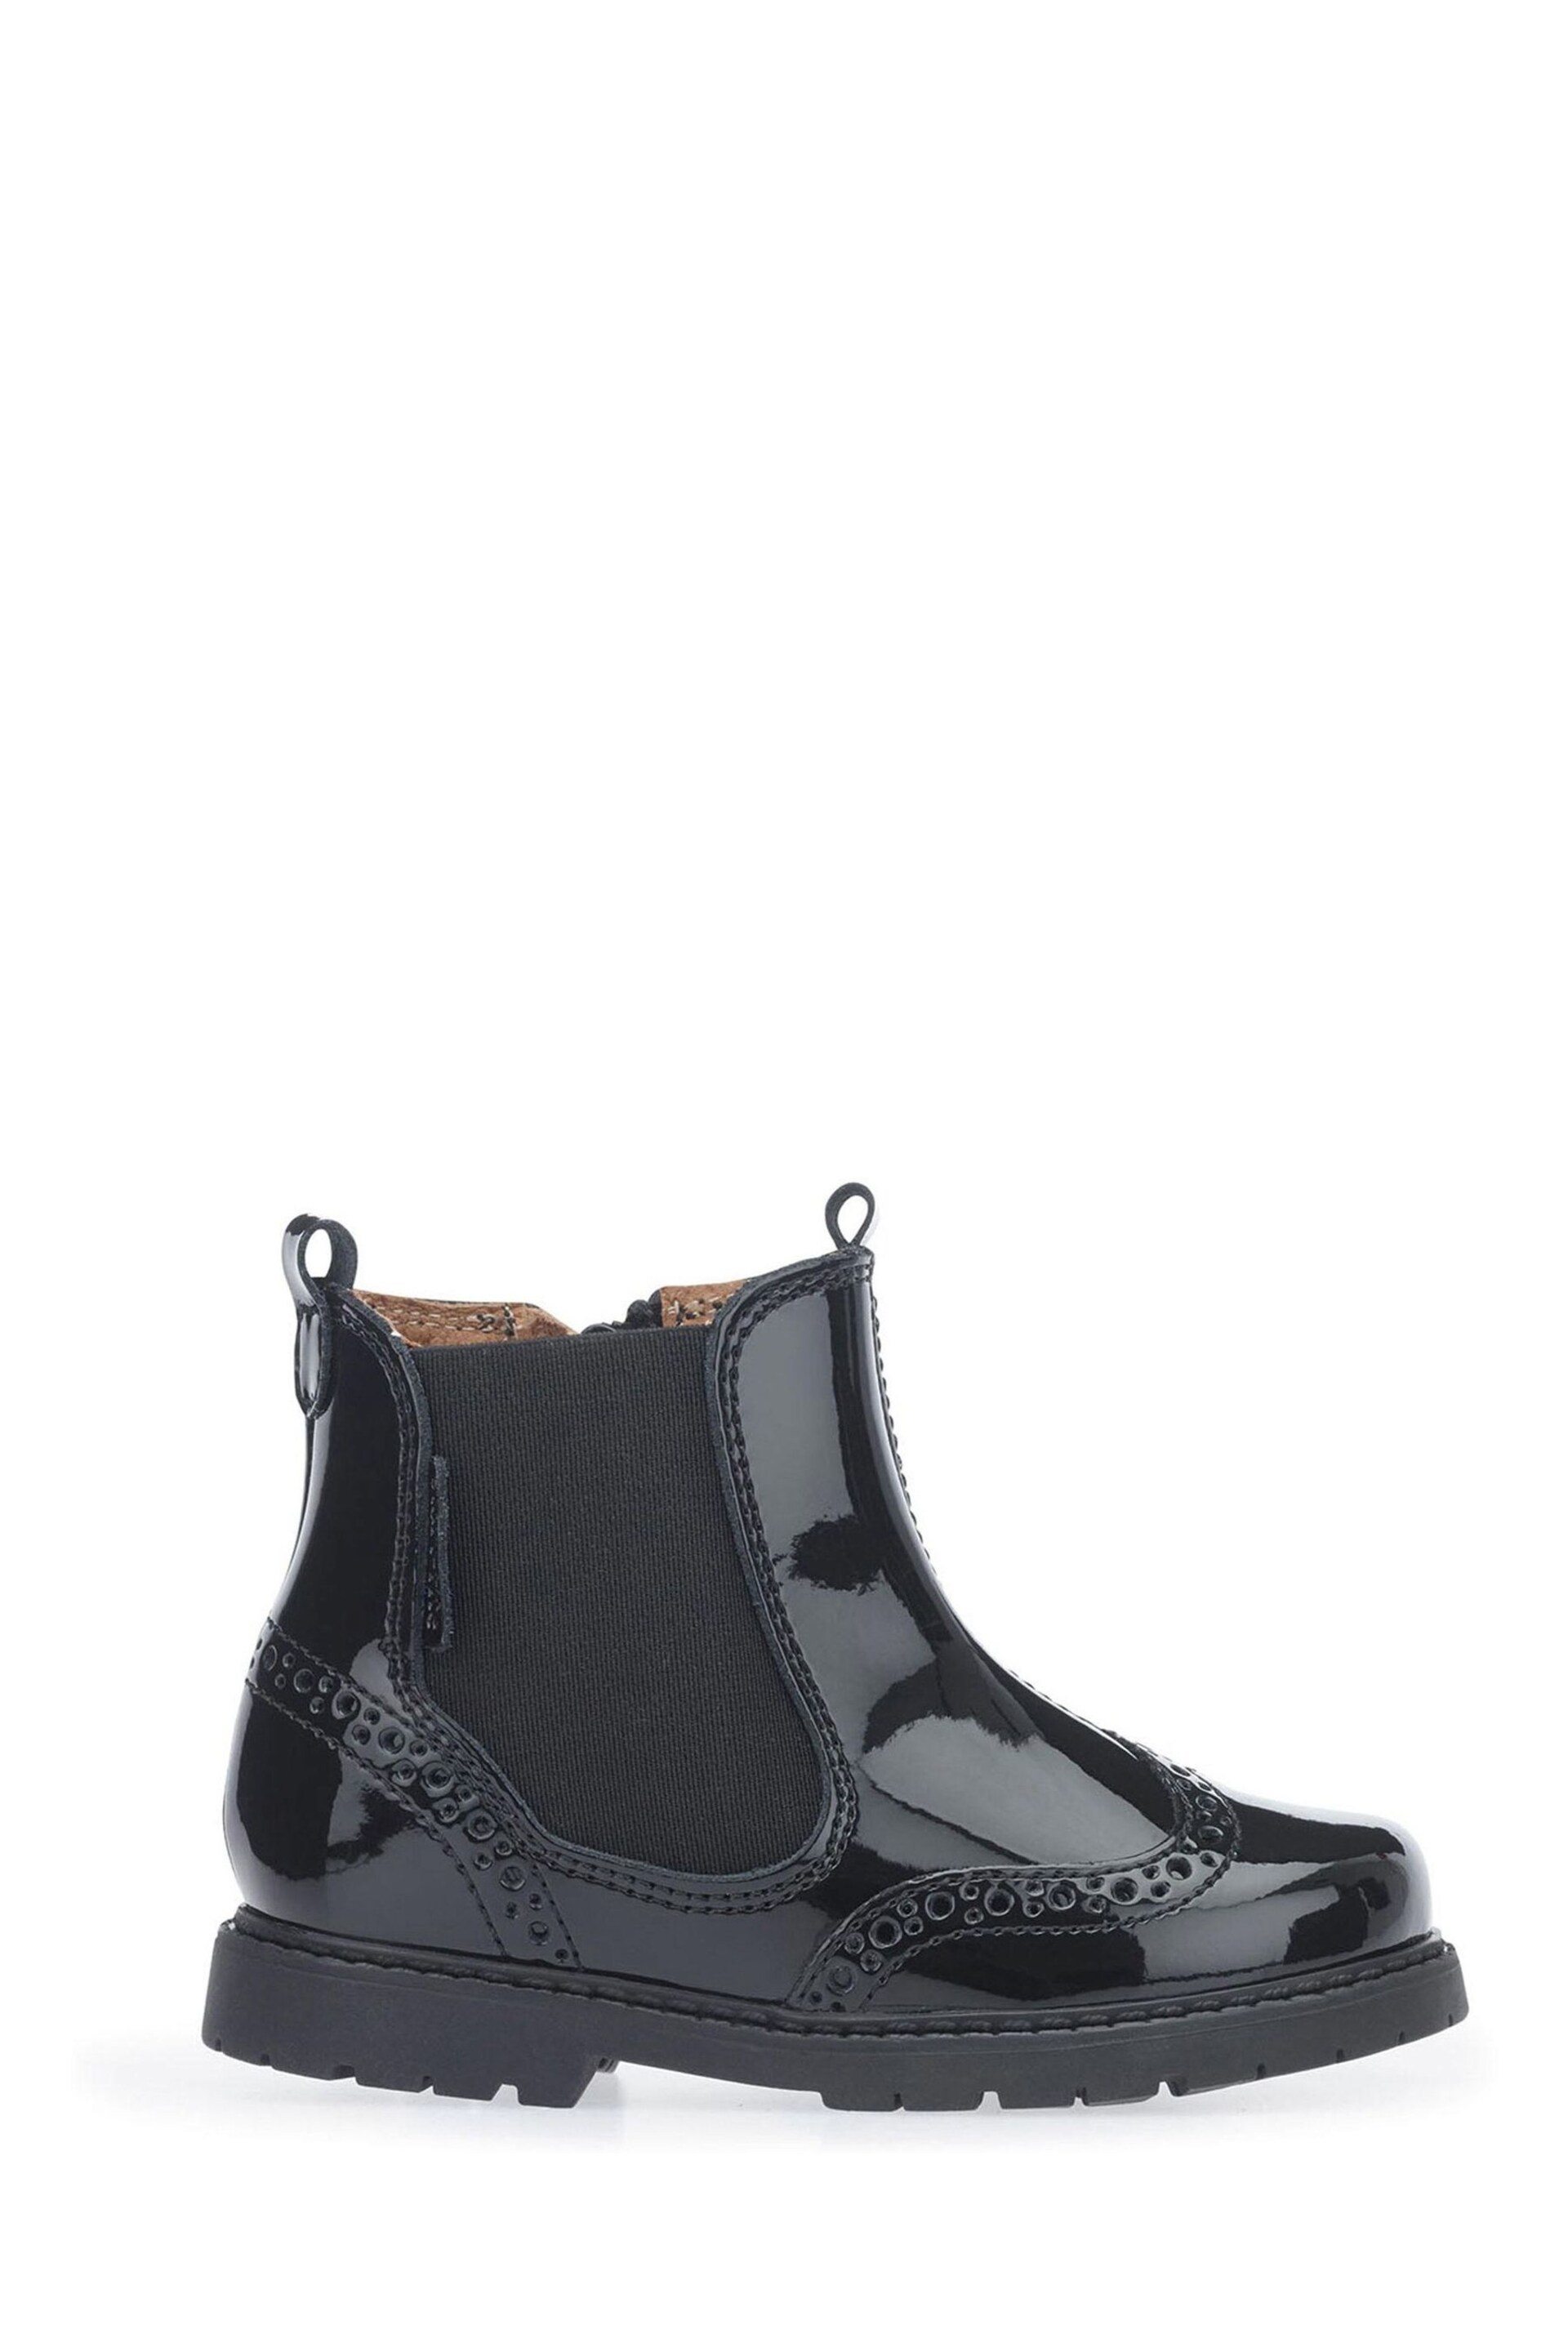 Start-Rite Black Patent Leather Zip-Up Chelsea Boots Standard Fit - Image 1 of 9